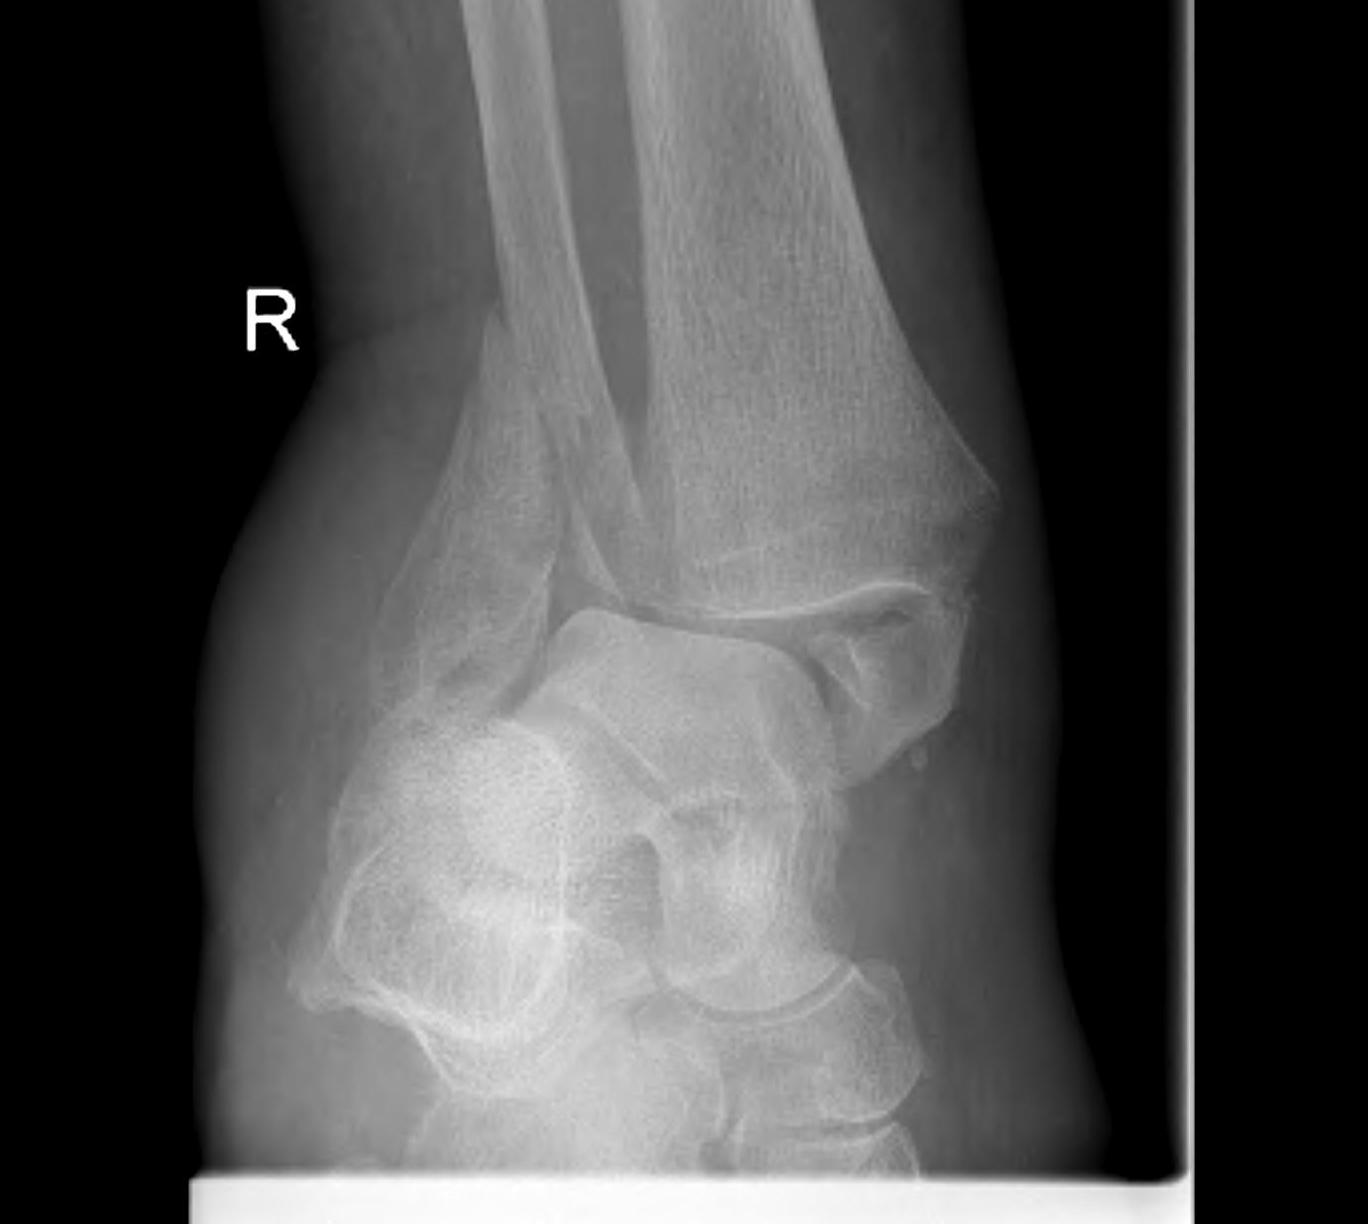 Ankle Fracture Osteoporotic